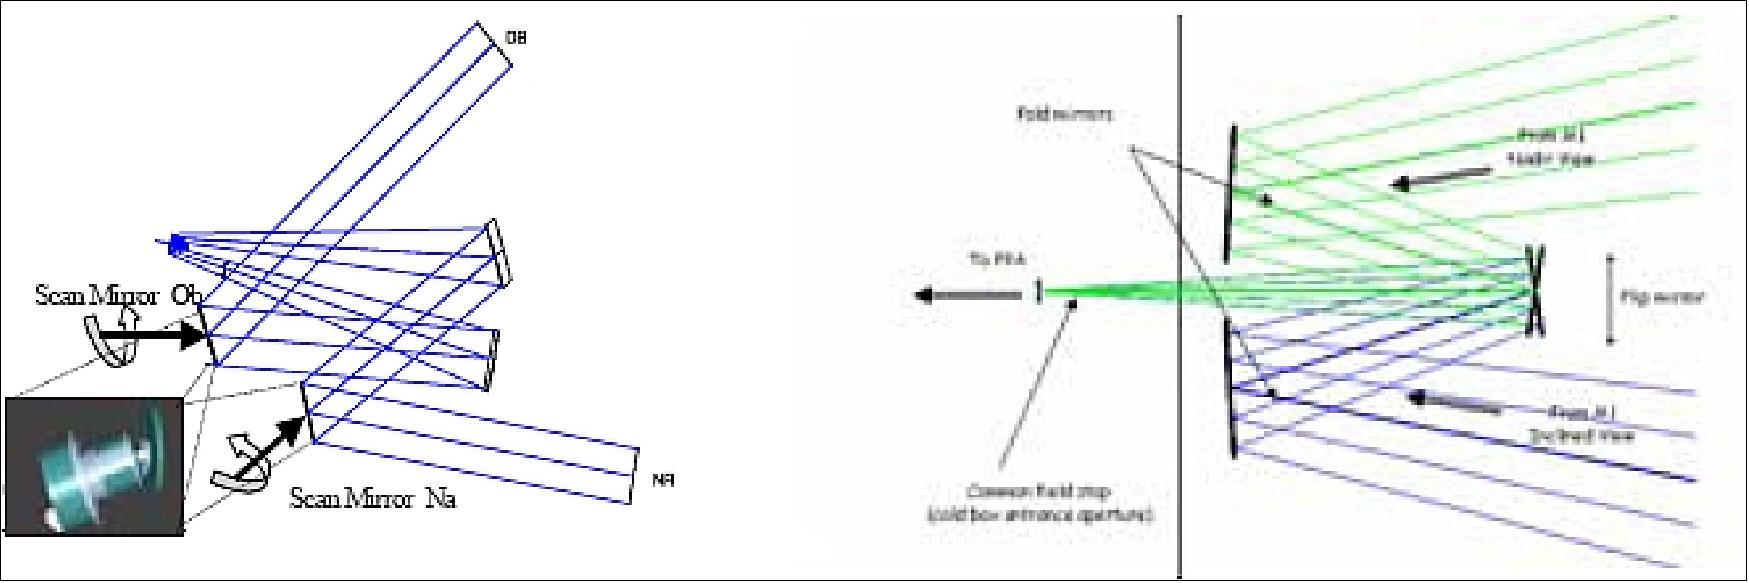 Figure 72: Beam Path on Centre Plane (left image) and the location of the FMD combining oblique (blue) and nadir (green) beams coming from the right (image credit: SLSTR consortium)